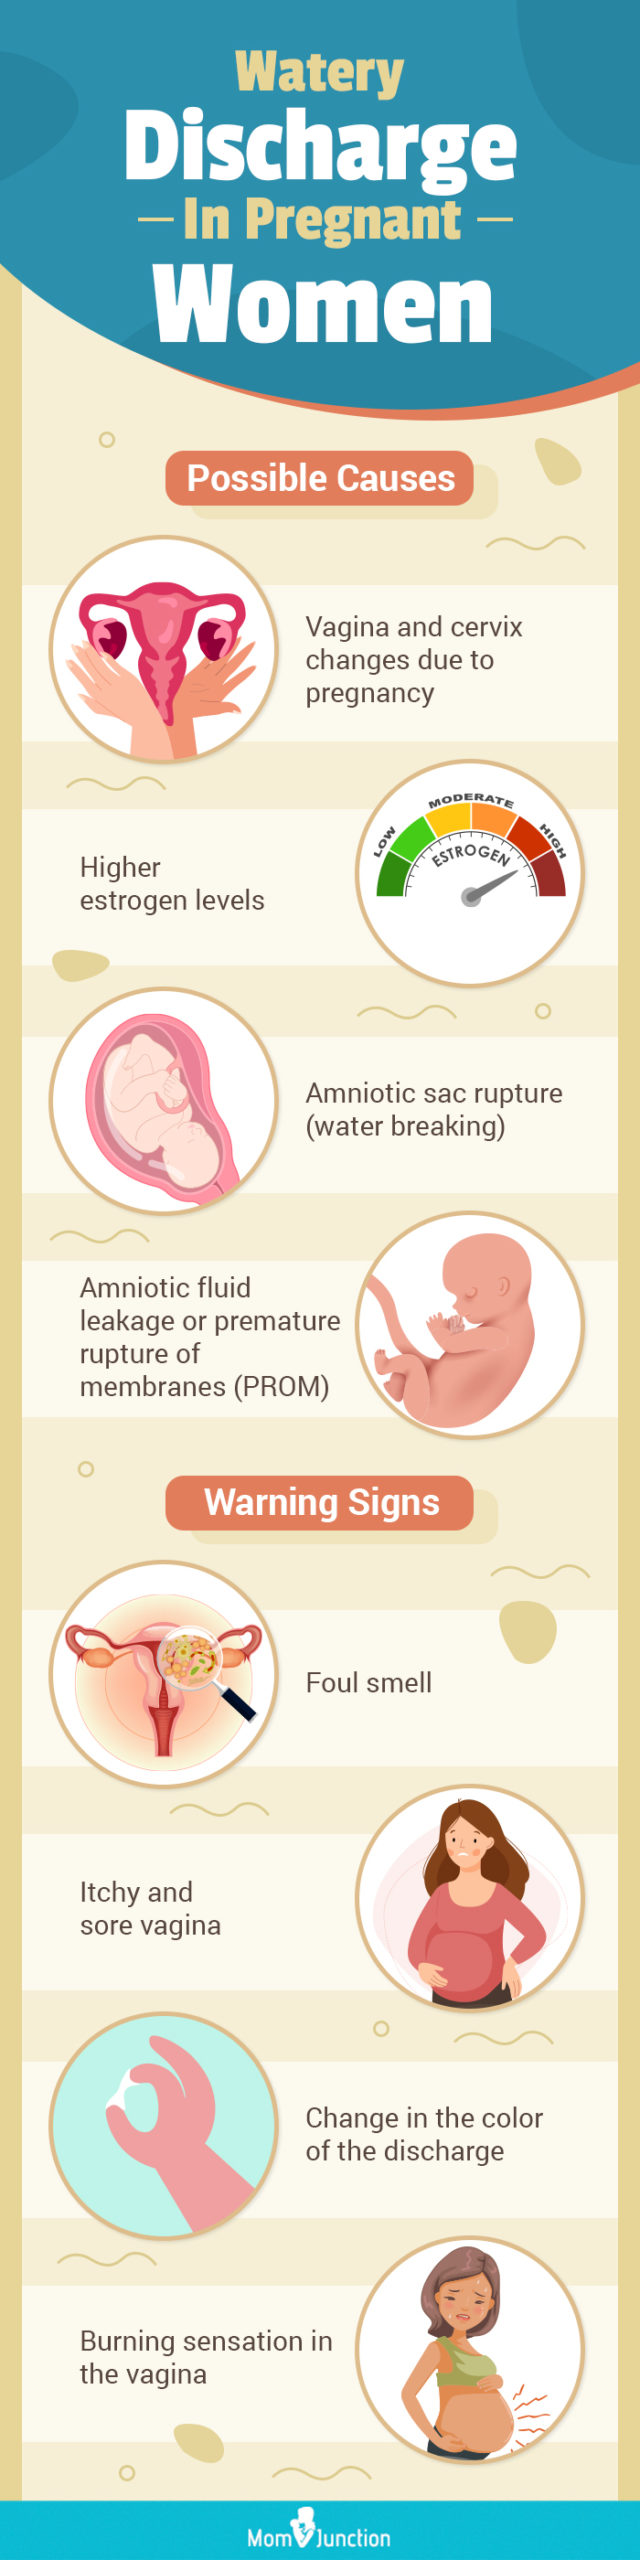 watery discharge in pregnant women(infographic)